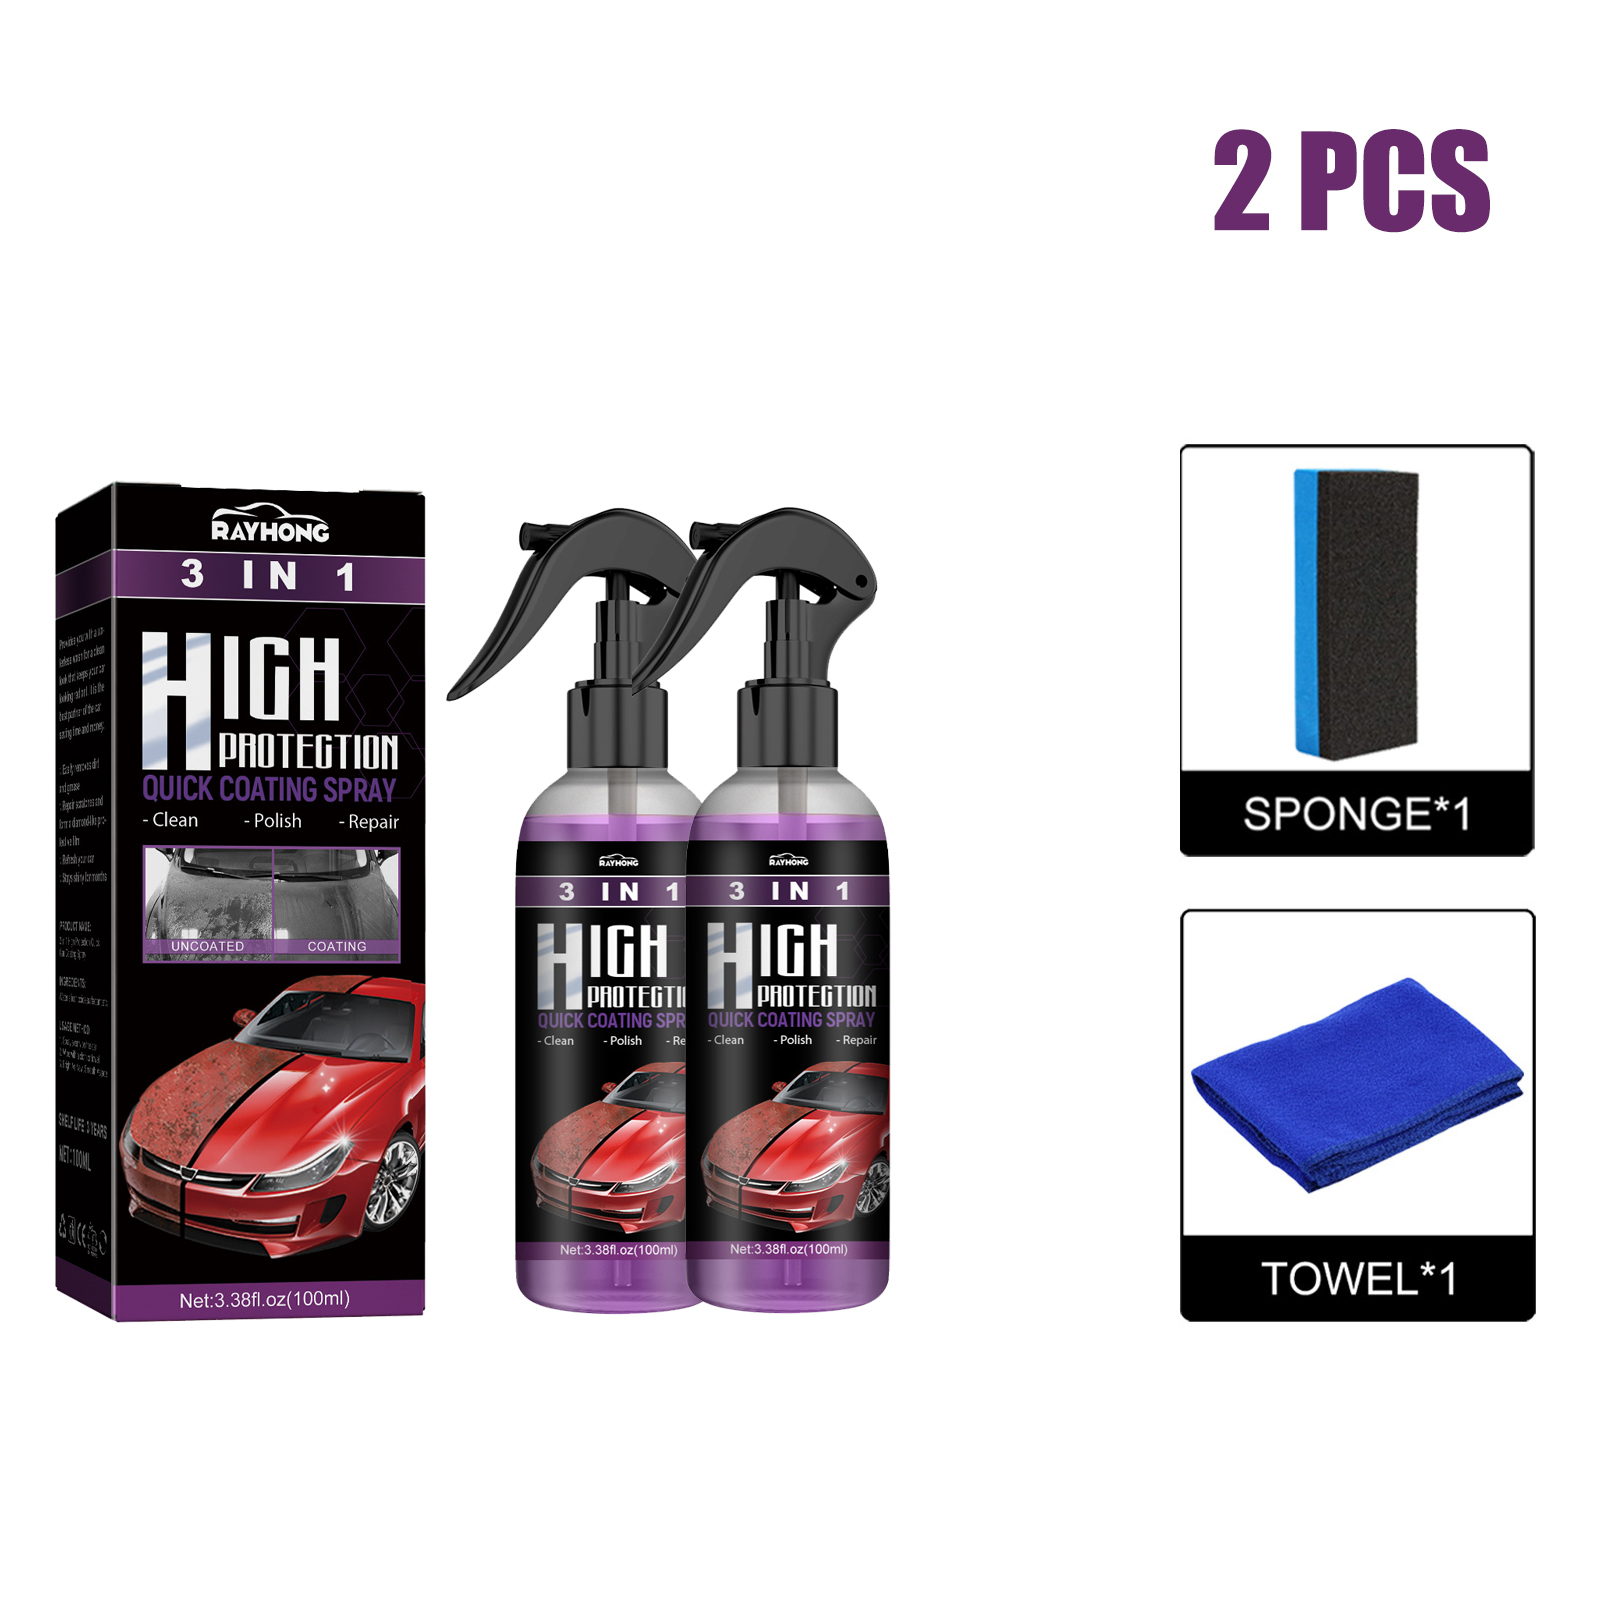 Car Coating Spray,High Protection 3 in 1 Spray,3 in 1 High